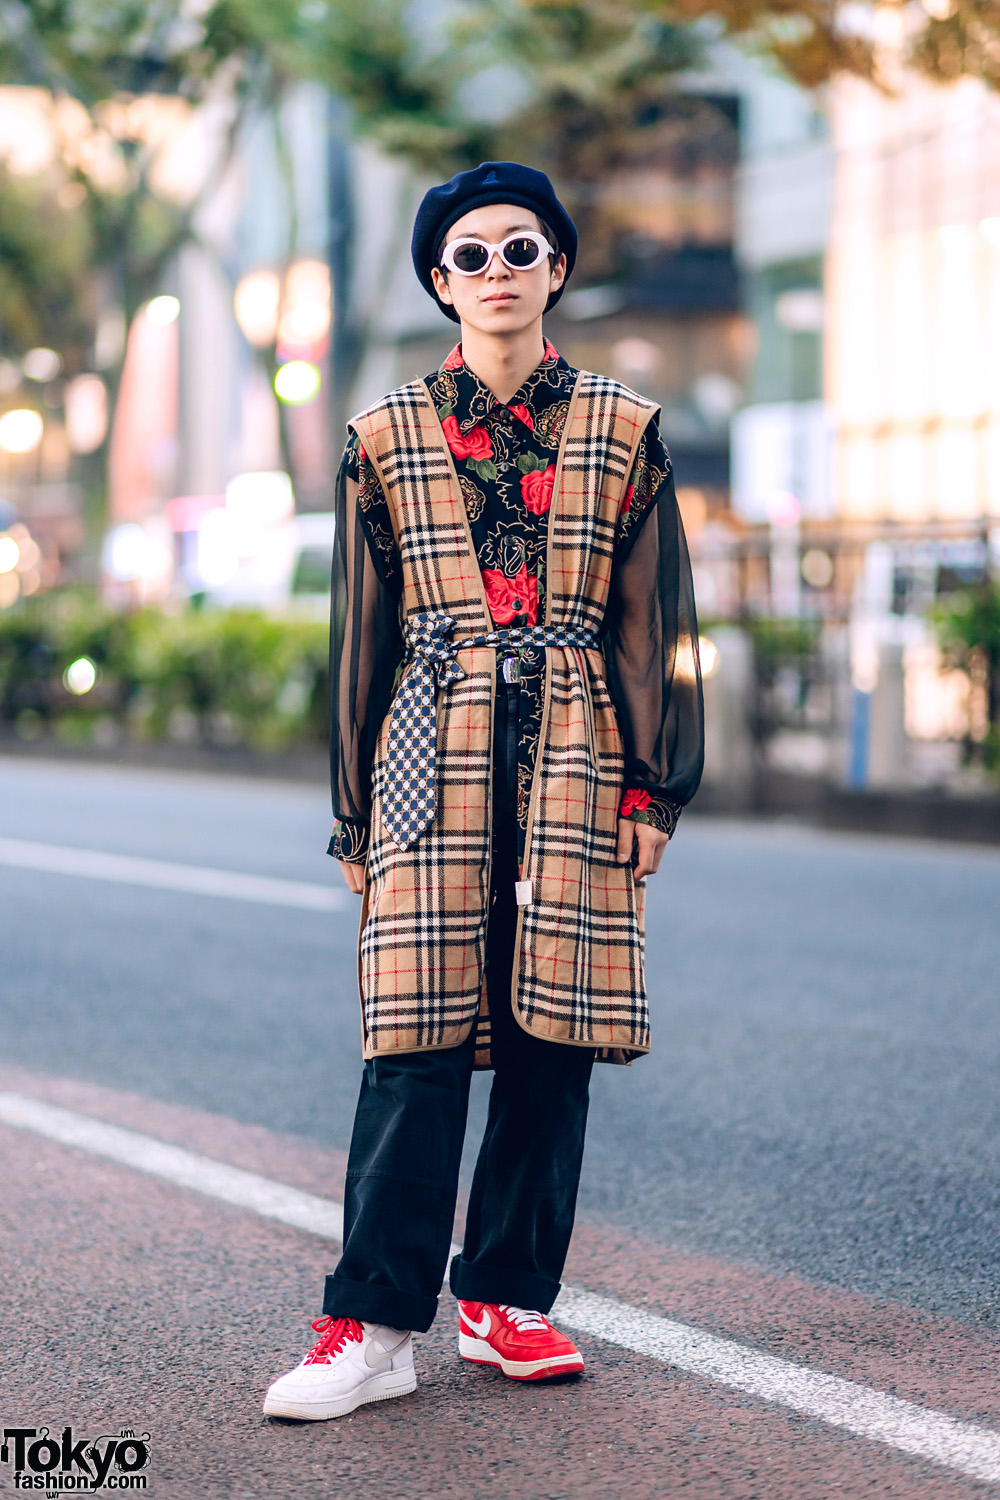 Mixed Prints Street Style in Harajuku w/ Burberry Coat Liner, Floral Shirt,  Hugo Boss, Kangol & Nike Mismatched Sneakers – Tokyo Fashion